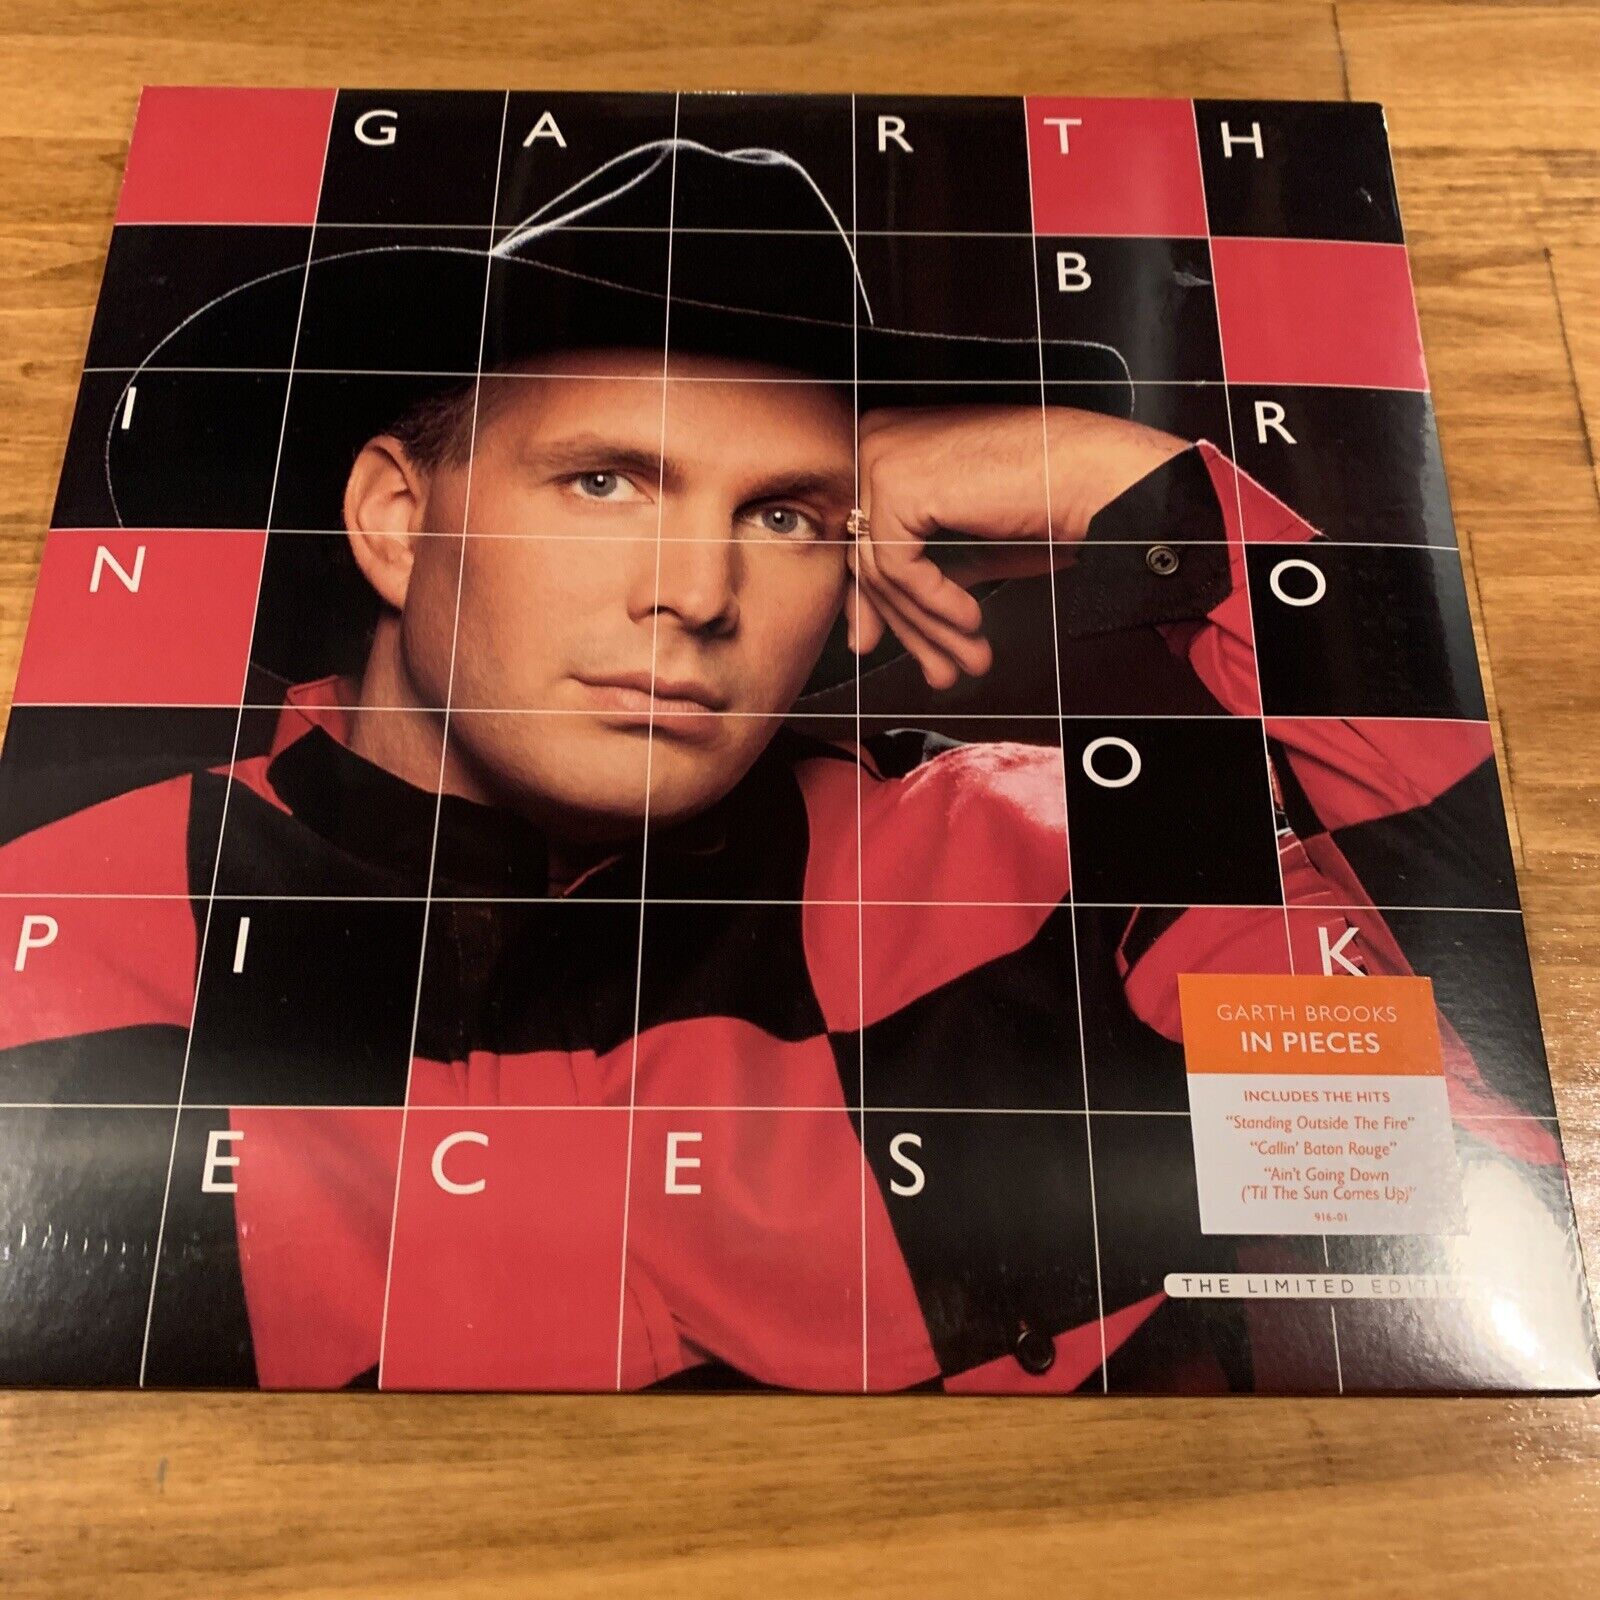 GARTH BROOKS IN PIECES 2019 LIMITED EDITION PEARL RECORDS NEW SEALED VINYL LP